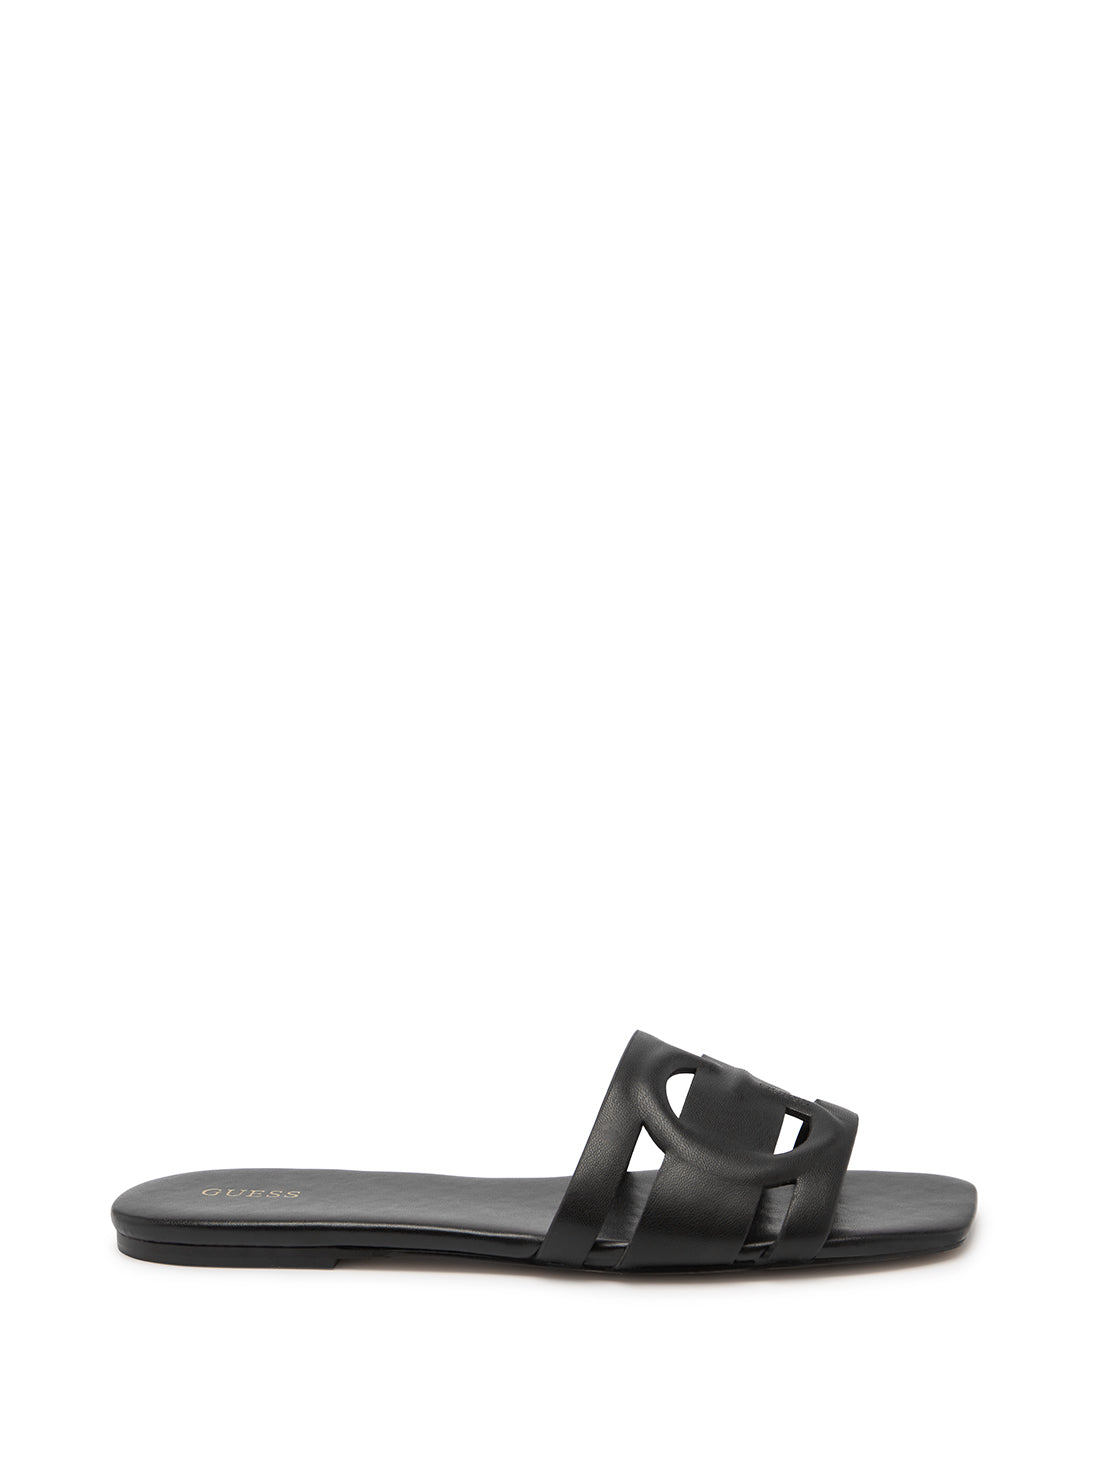 GUESS Women's Black Caffy Sandals CAFFY Side View